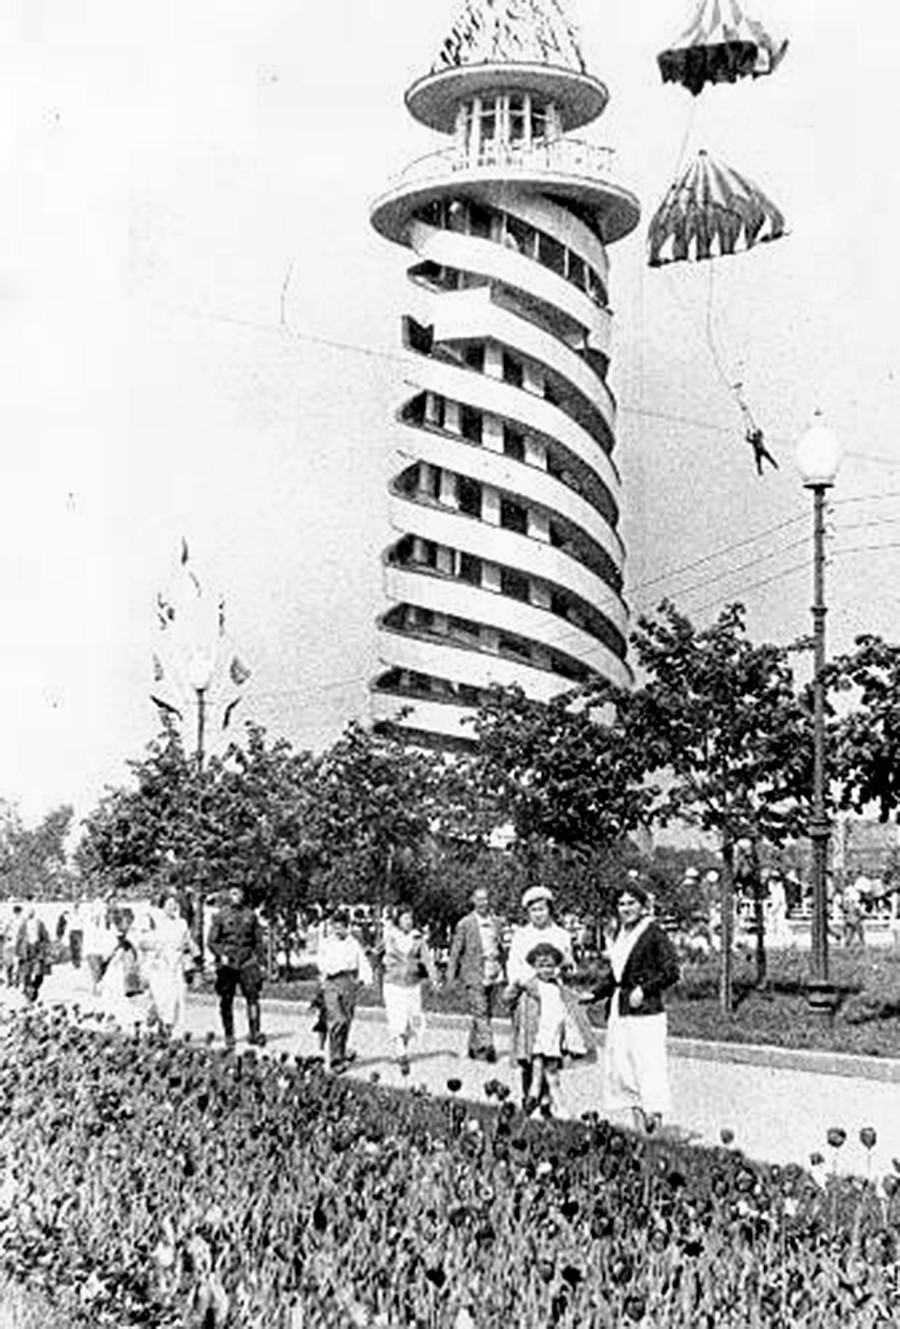 Parachute tower in Gorky Park, 1930s.